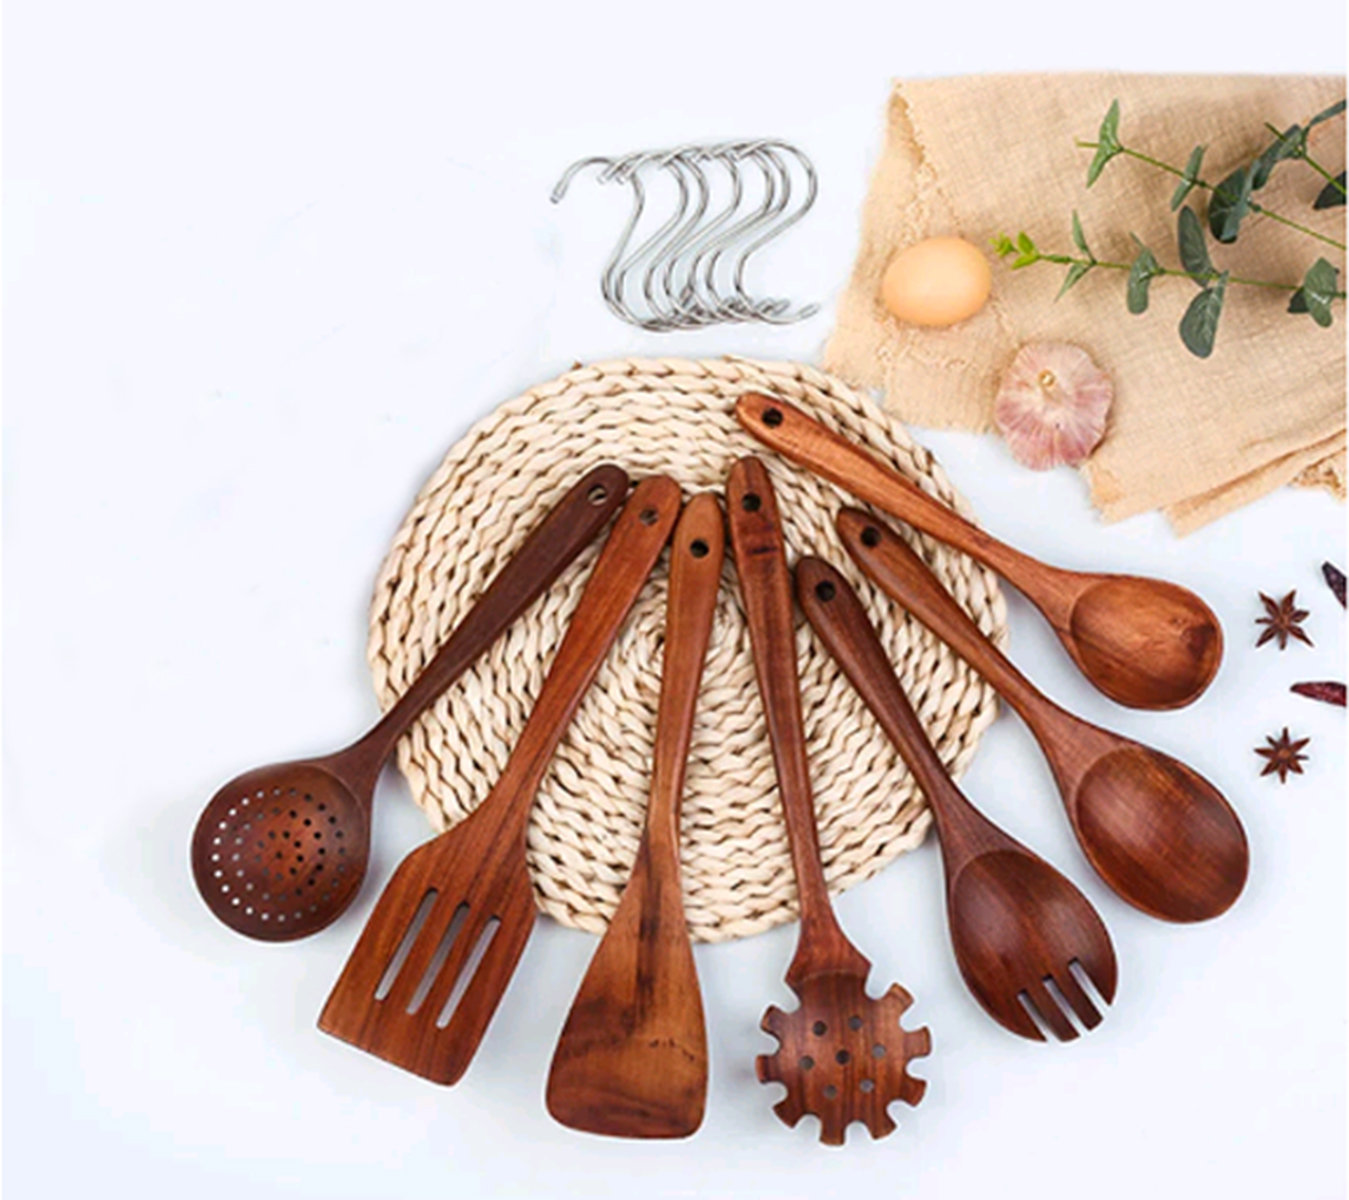 Zulay Kitchen (6 Pc Set) Teak Wooden Cooking Spoon Sets in Smooth